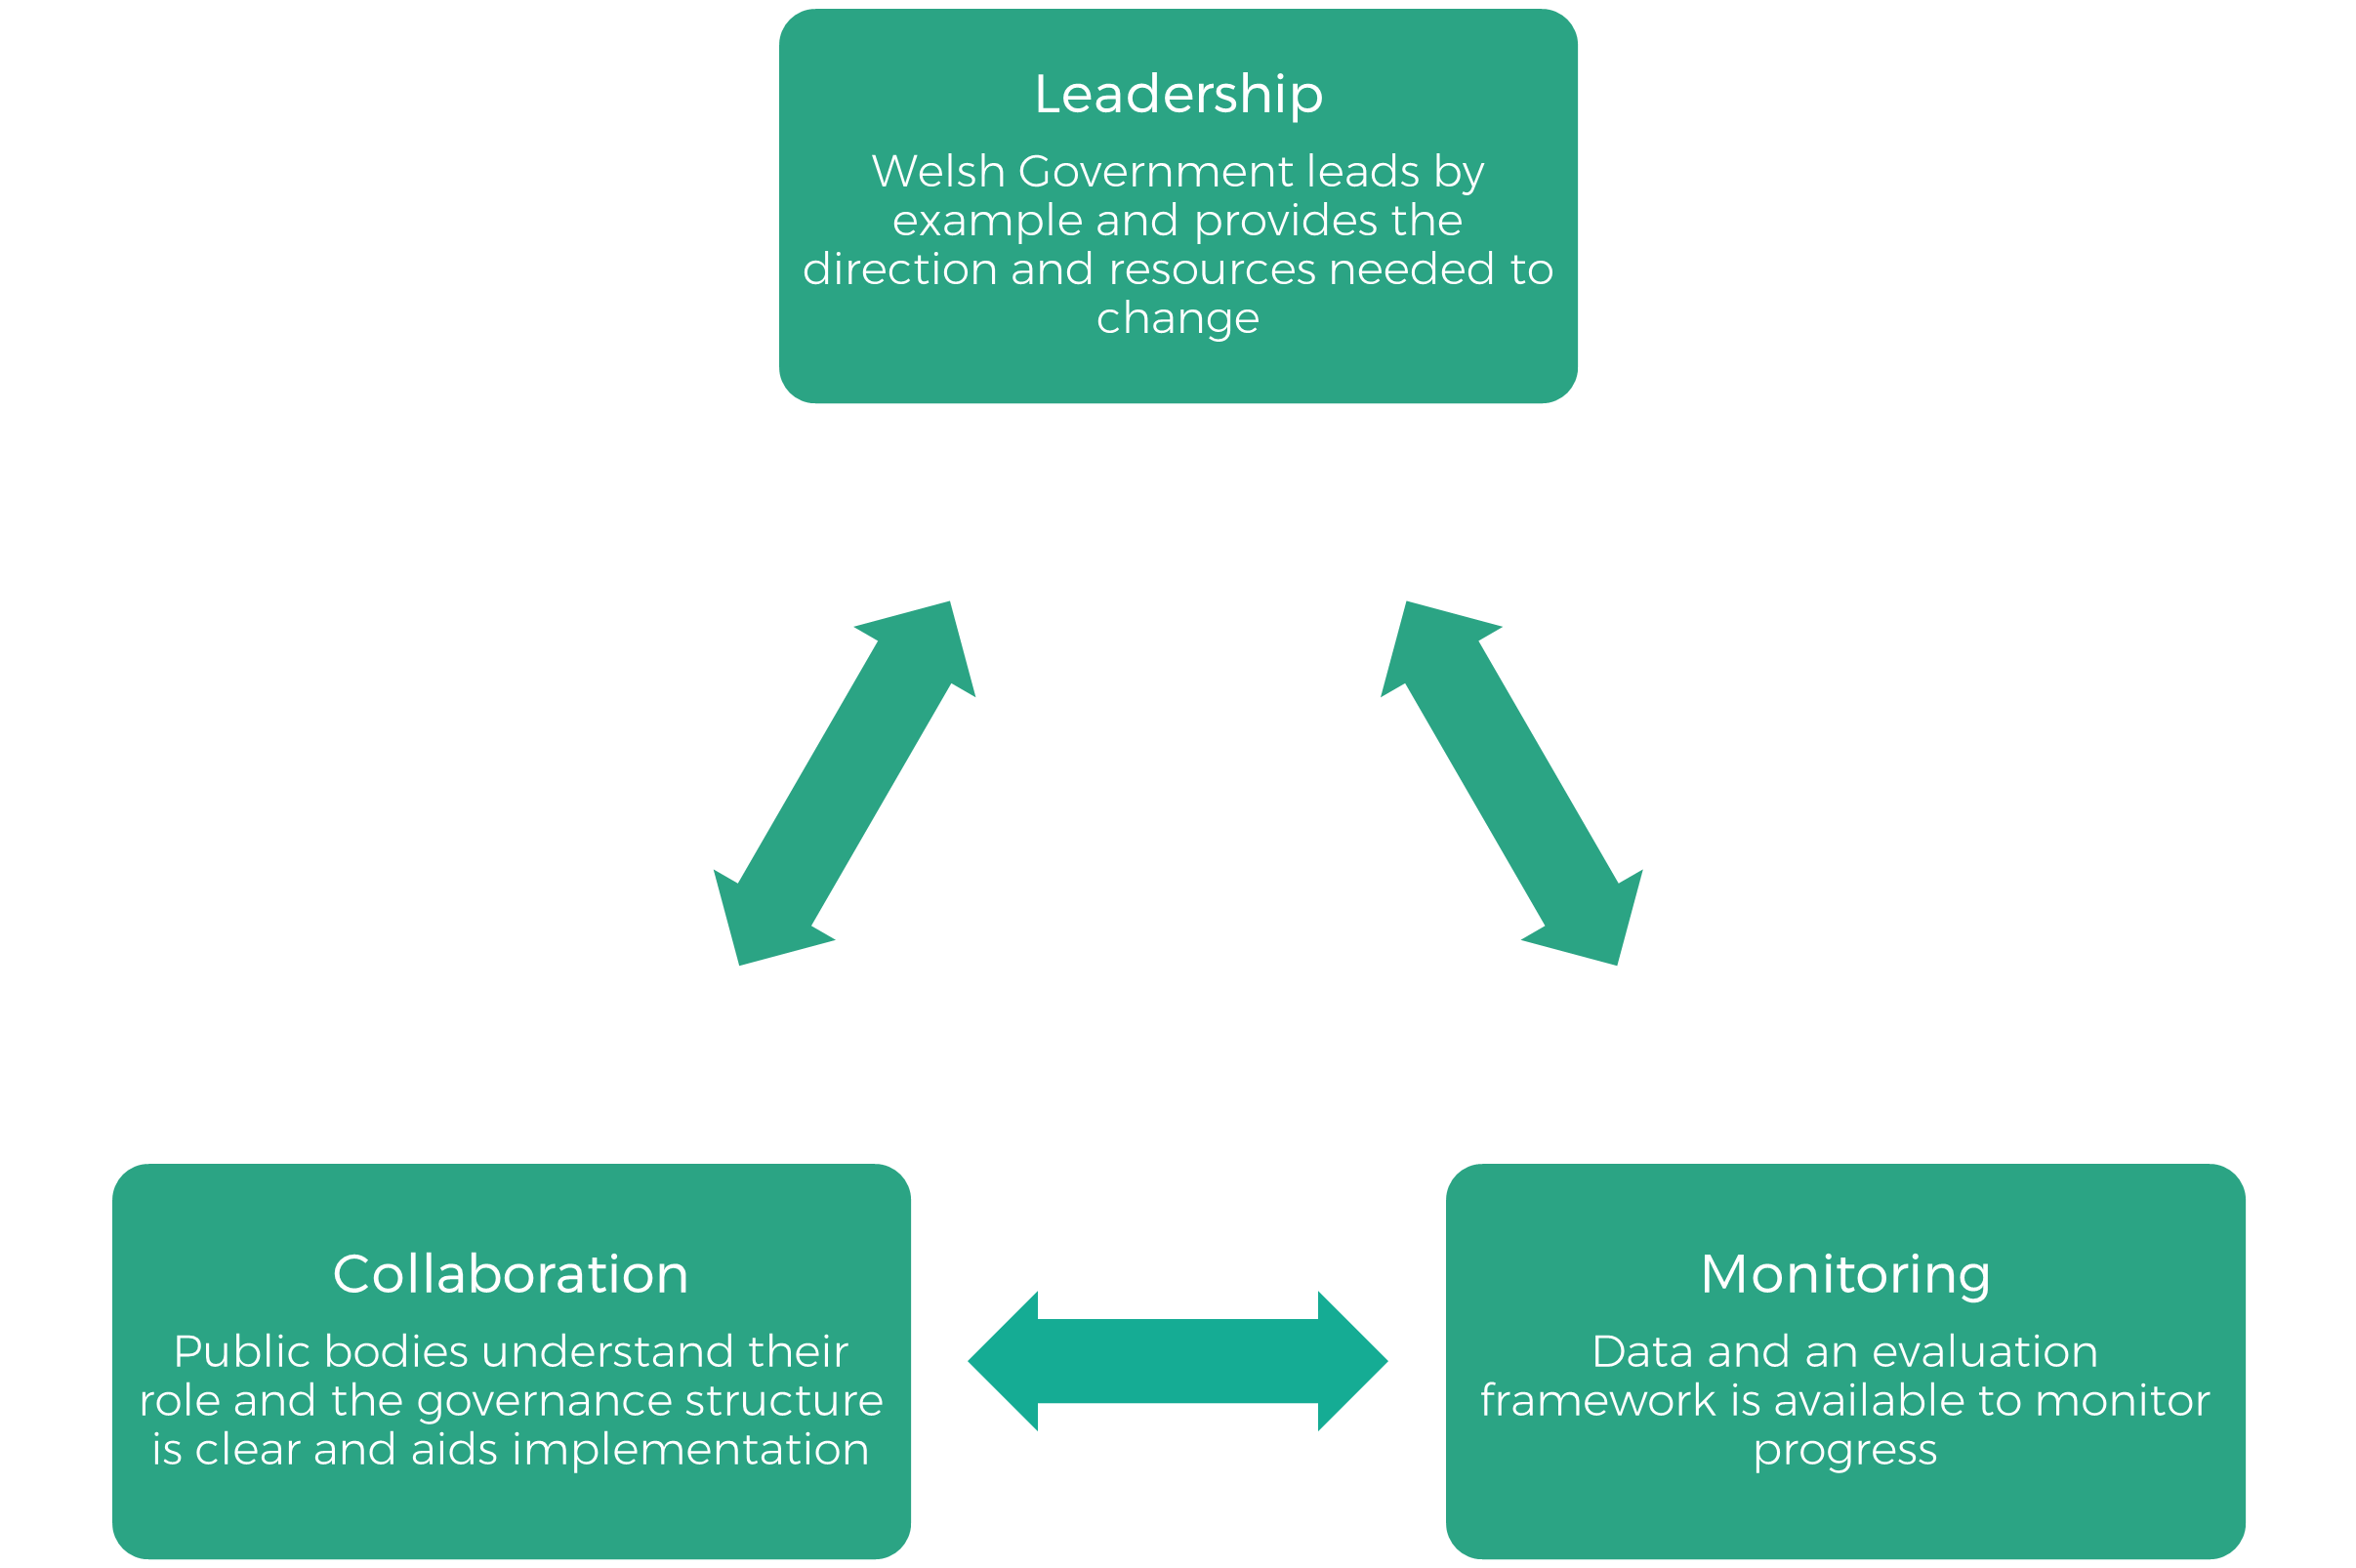 Image shows three key areas (leadership, collaboration and monitoring) to ensure successful implementation of the ArWAP – identified in the Equality and Social Justice Committee report